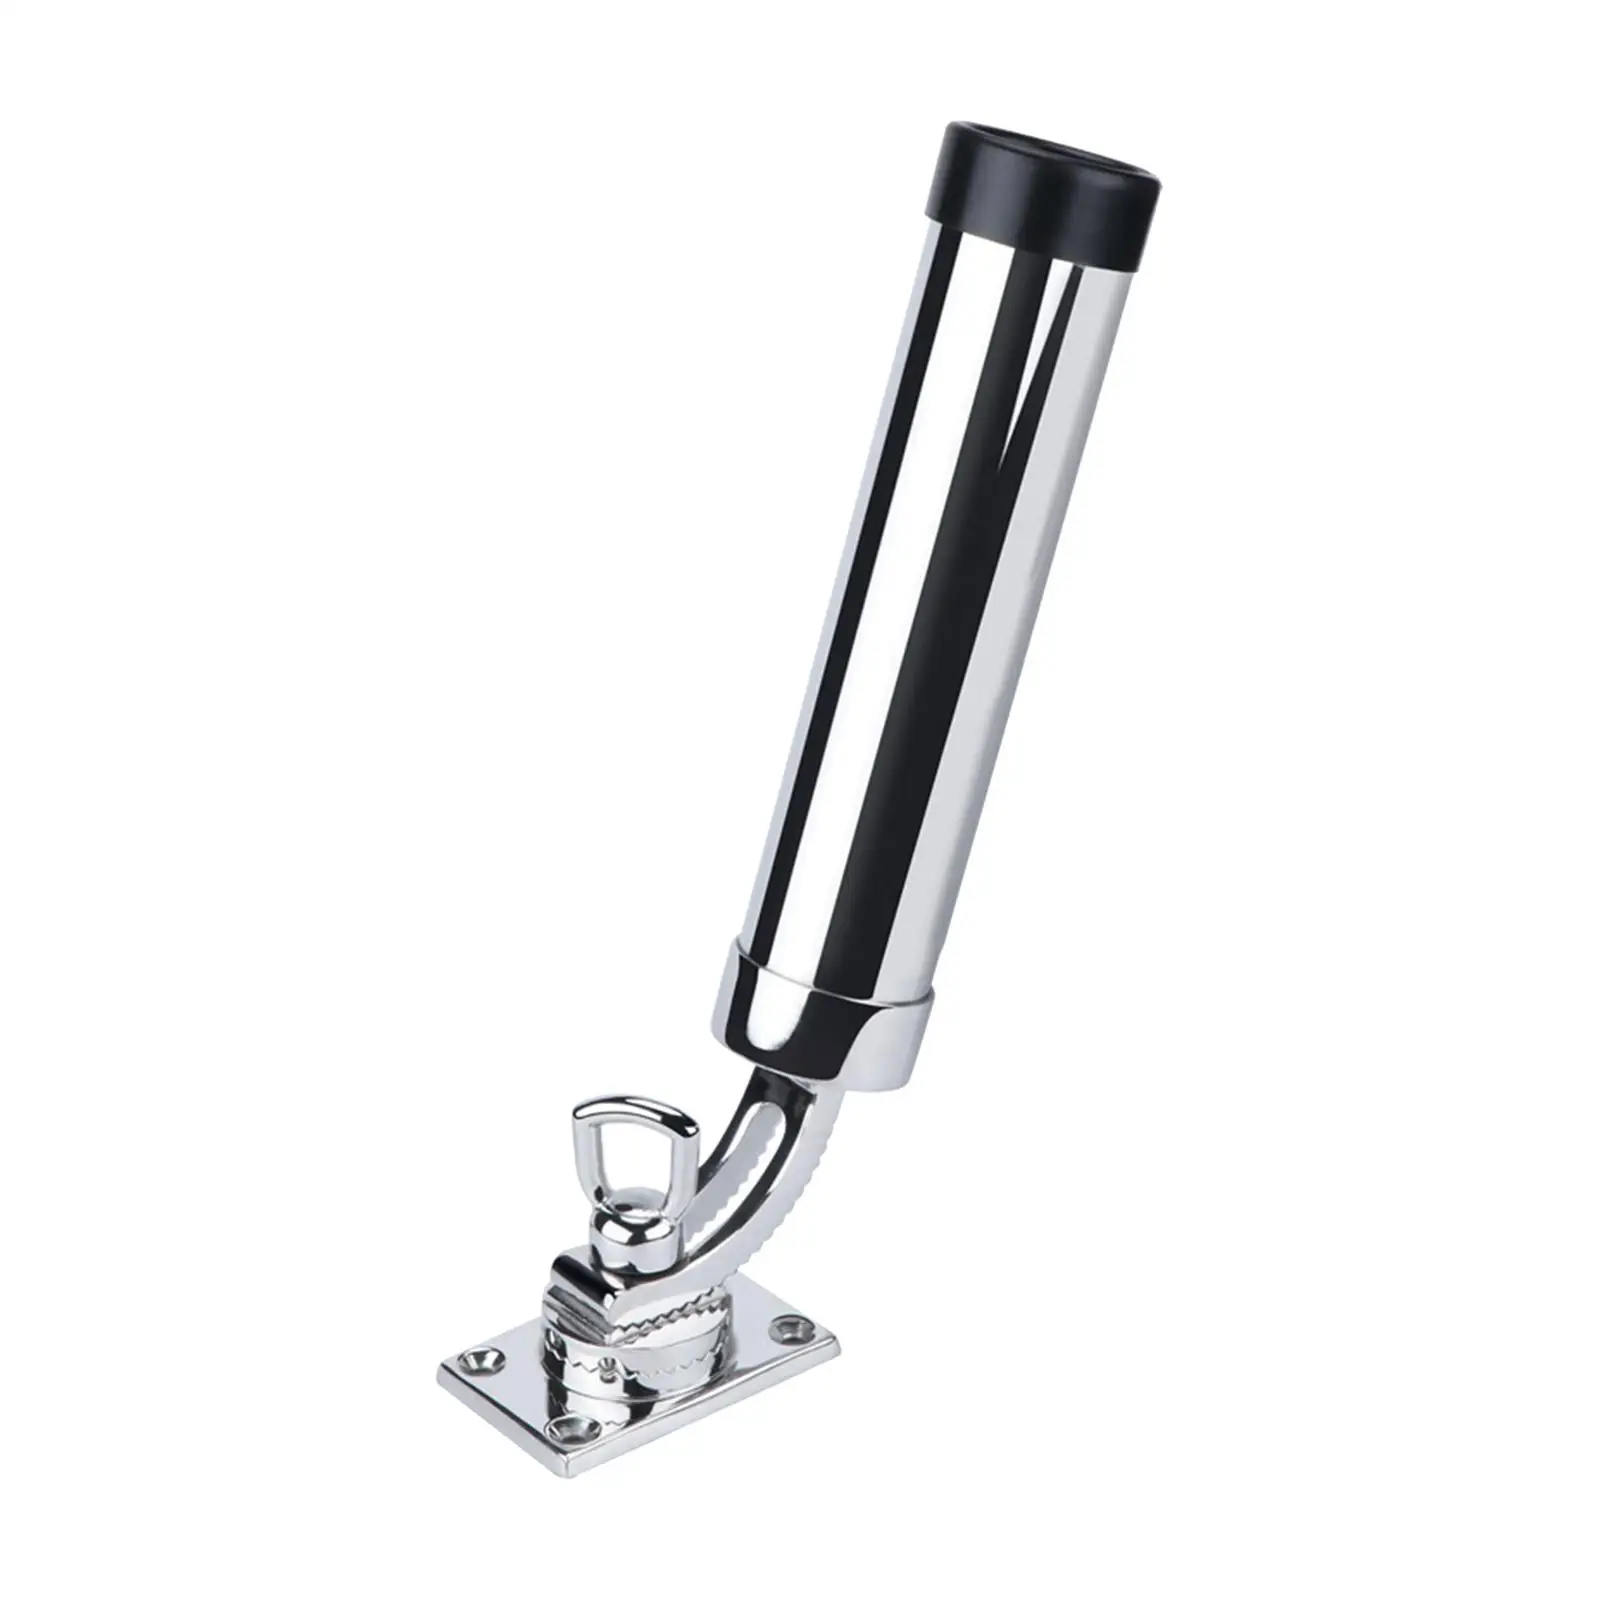 Fishing Rod Rack Holder Stainless Steel on Easy Install Boat Accessories Hardware Clamp on Rod Holder Fishing Pole Holder